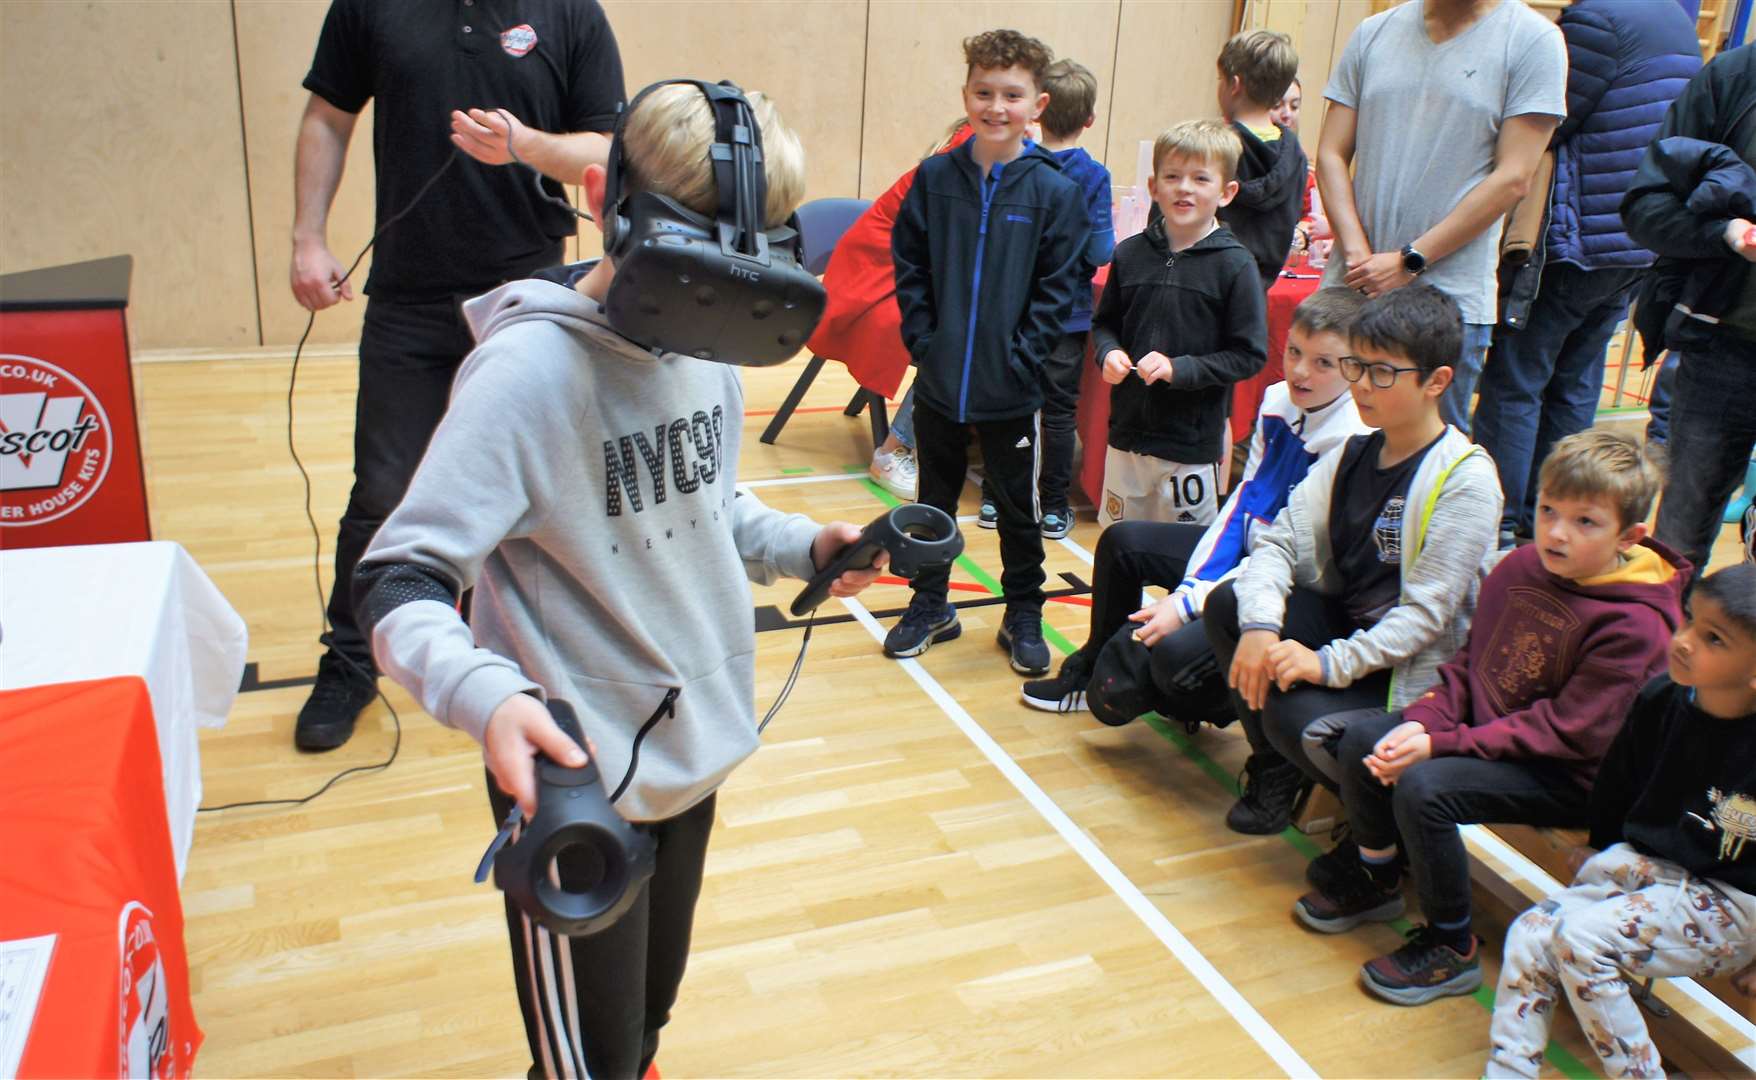 A virtual reality experience was possible at last year's Caithness International Science Festival family fun day courtesy of Norscot Joinery. Picture: DGS